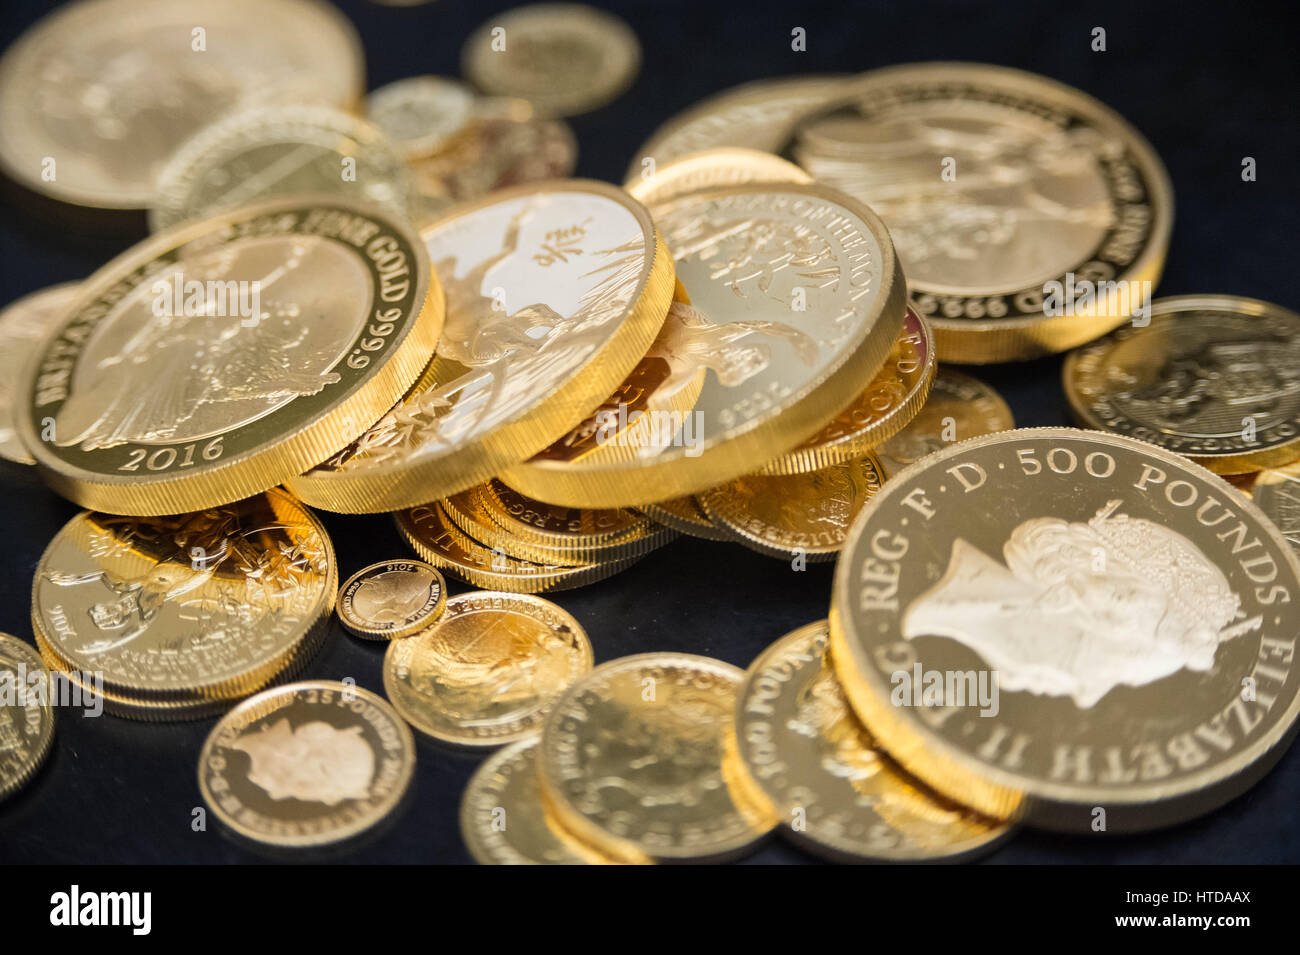 As well as standard 20p, 50p, £1, and £2 coins, the London Assay office also tests commemorative coins in their Laboratory at The Goldsmiths' Company Assay Office. Seen here a mix of gold proof sovereign coins. Stock Photo